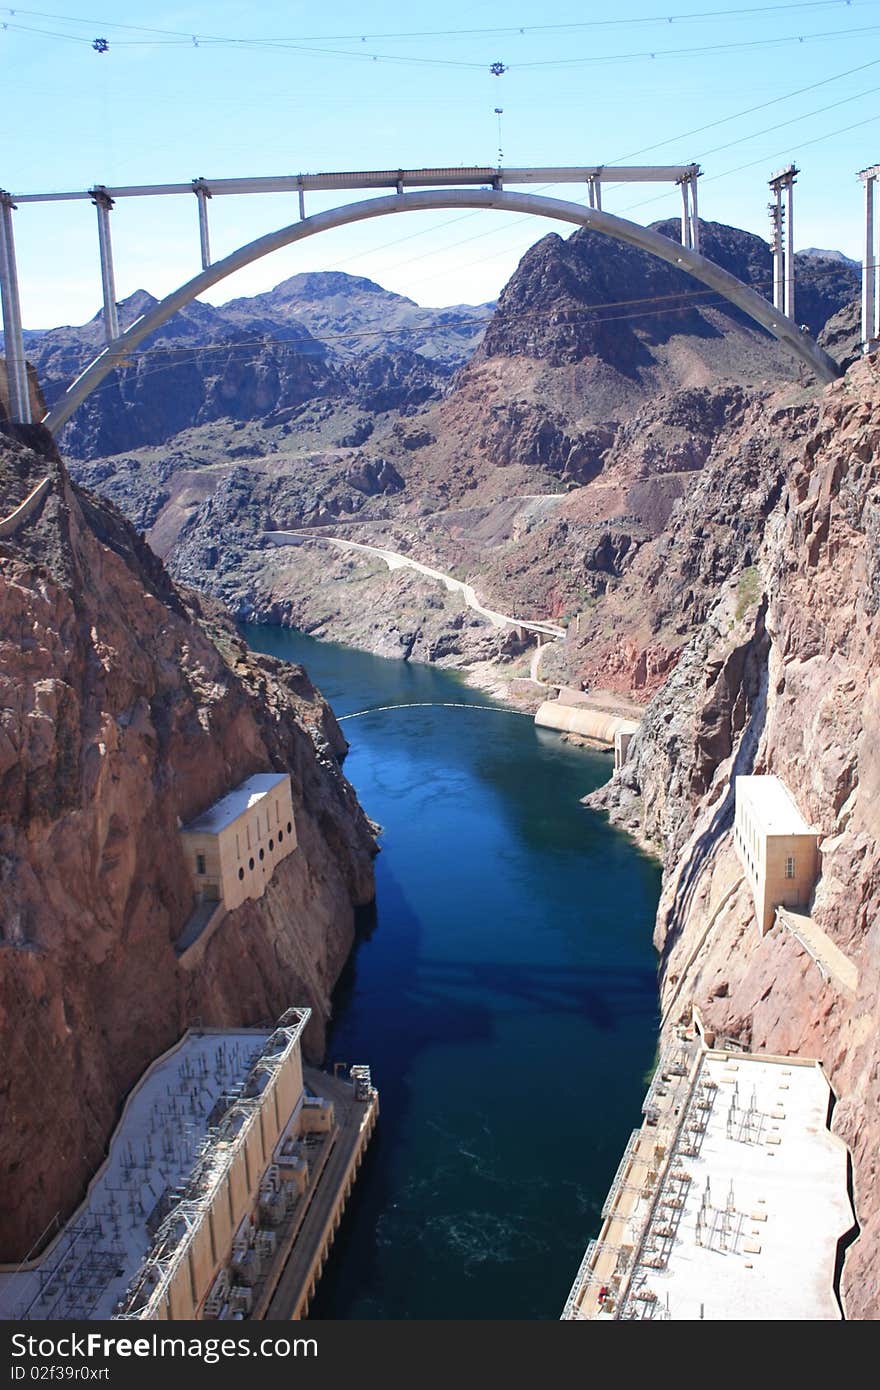 Hoover Dam and the Colorado river with under construction bridge.